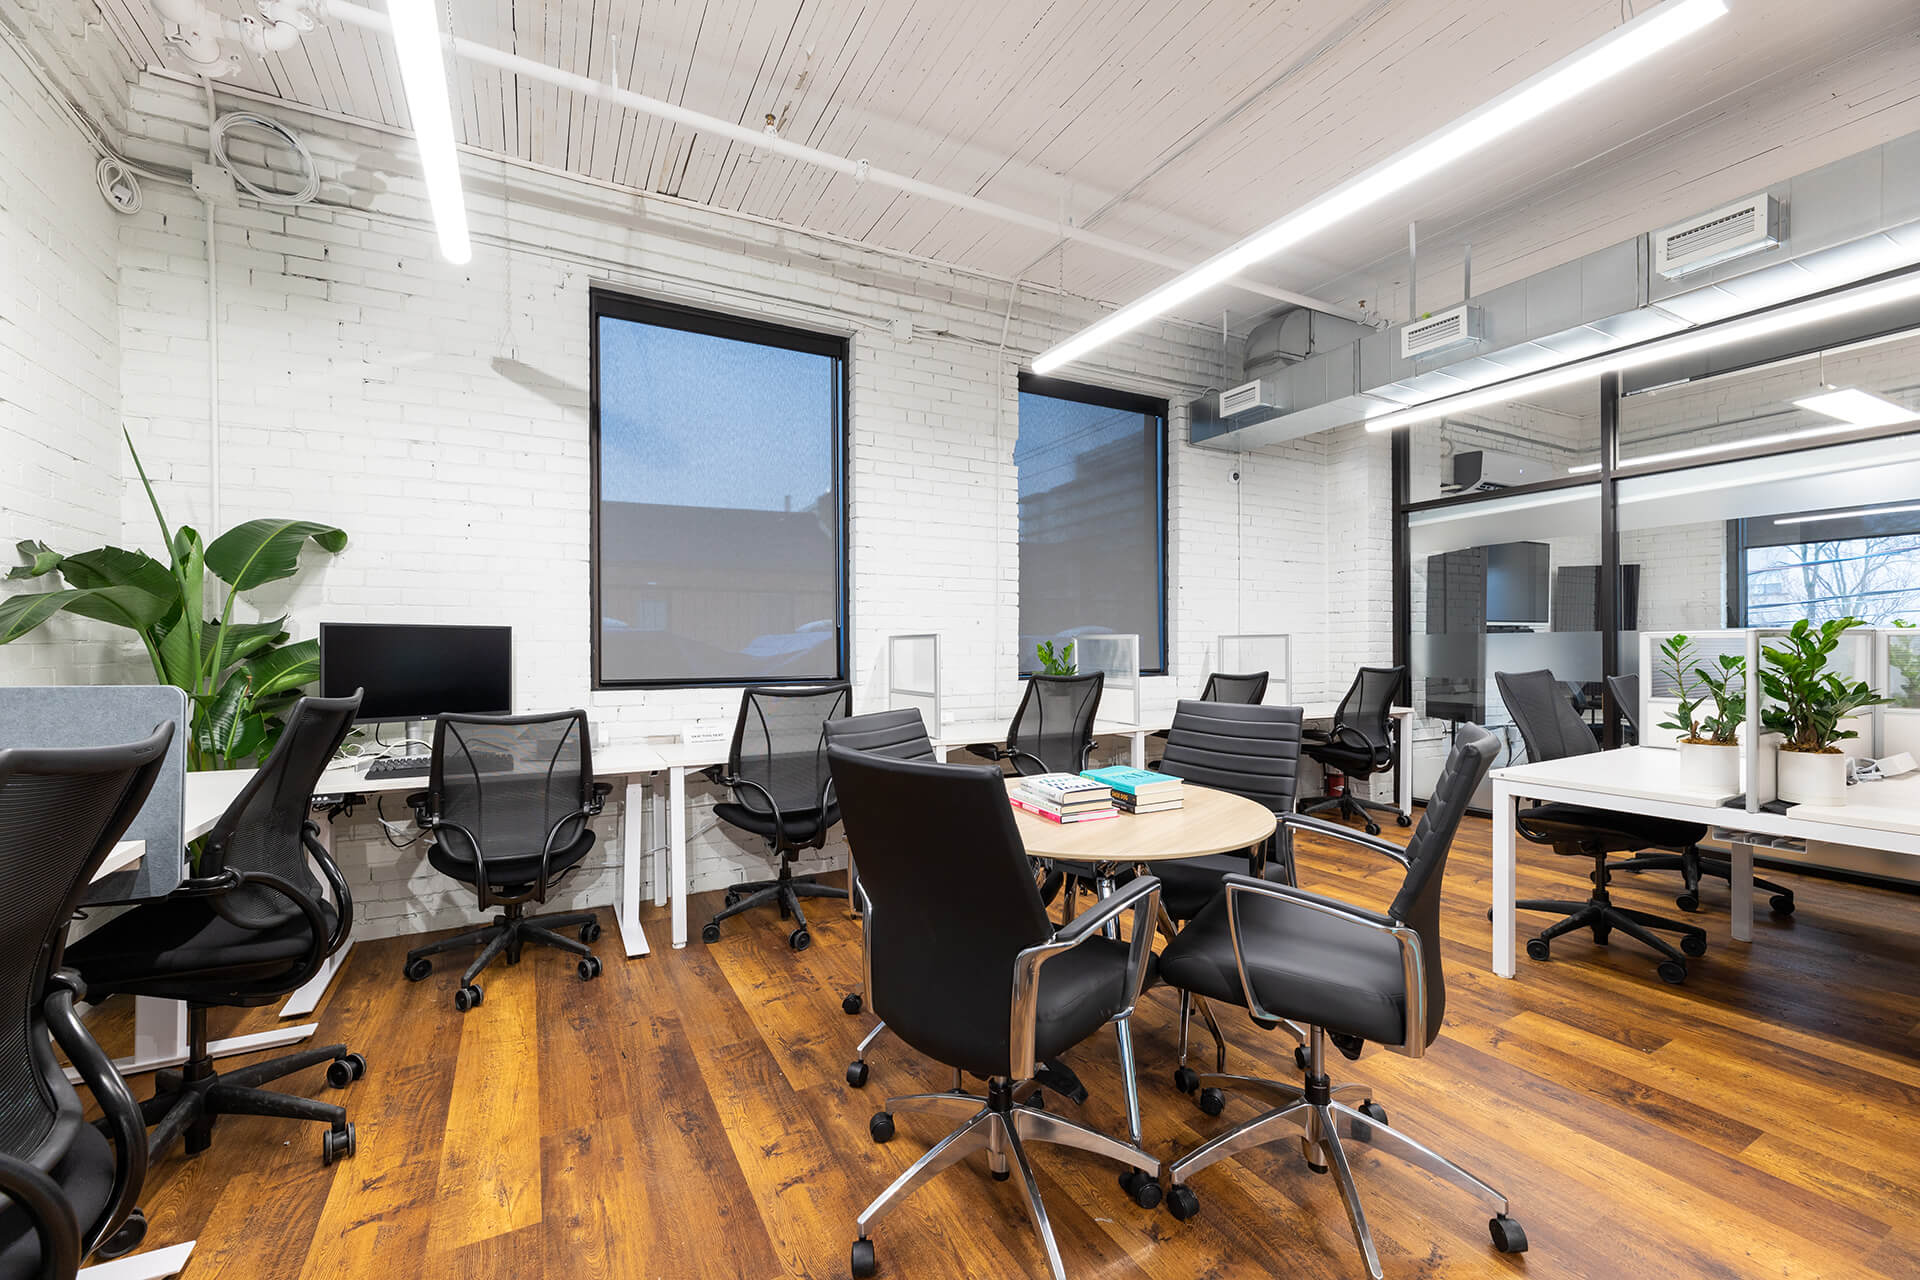 Staples Canada jumps on the co-working trend, heralding a new era of shared  workspaces